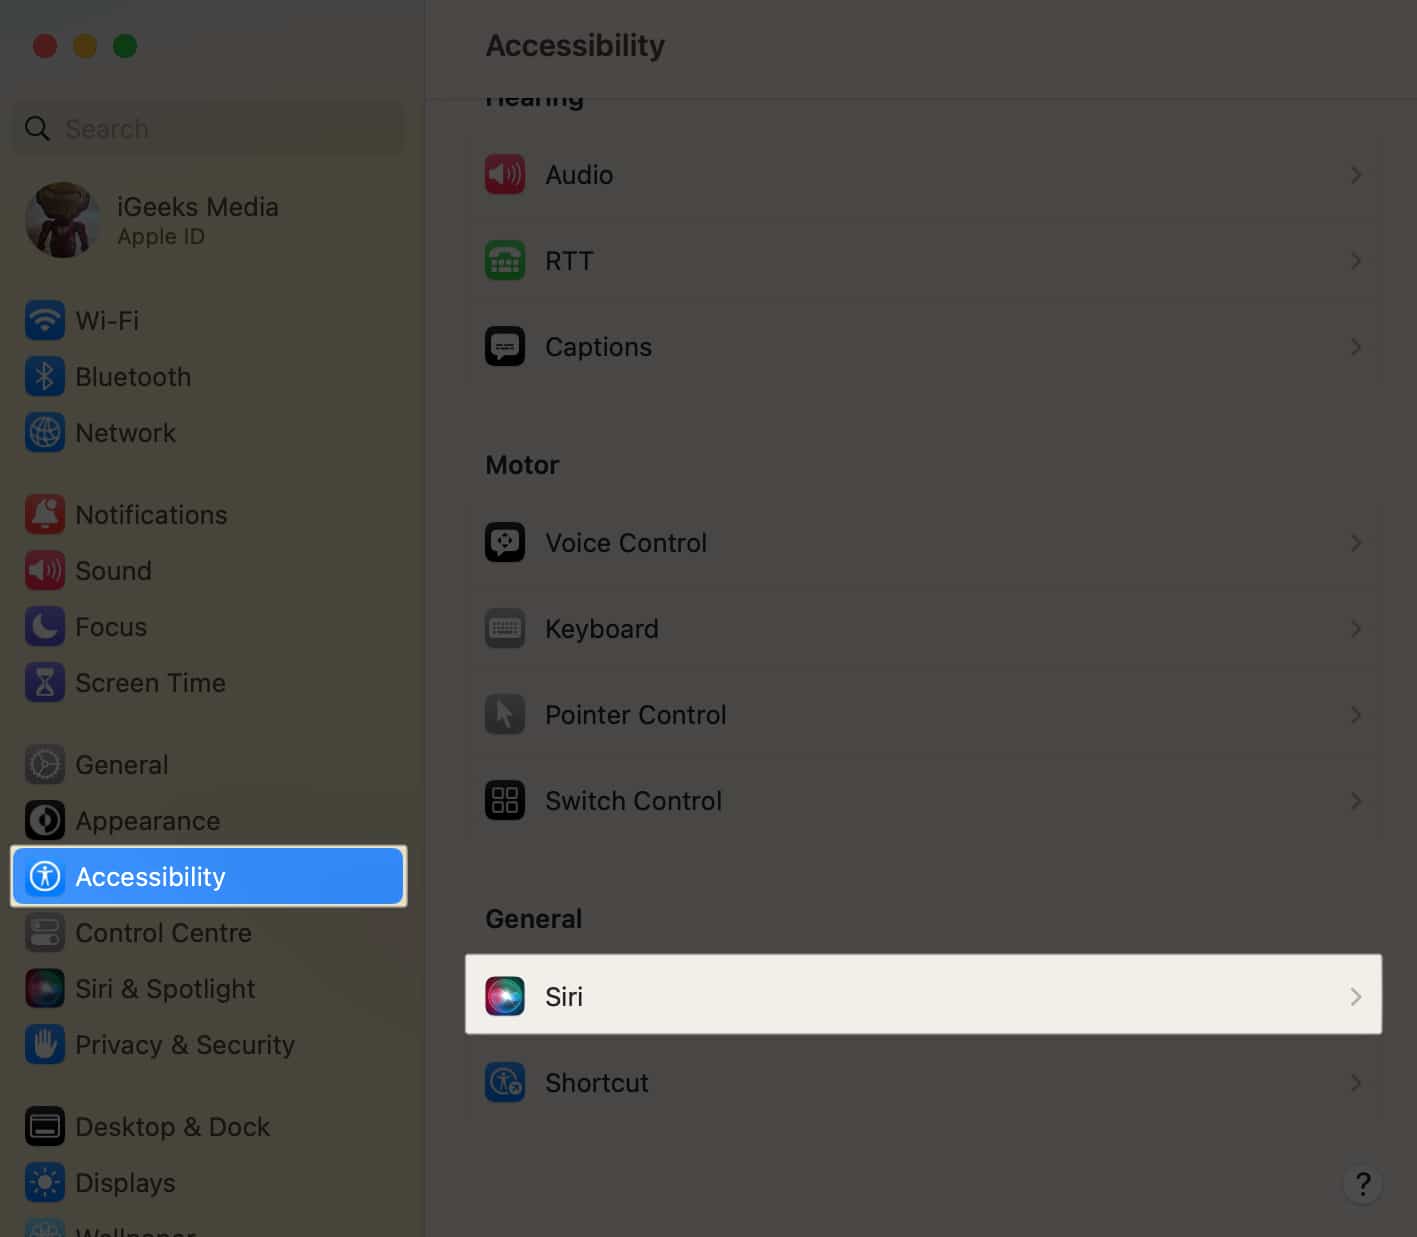 Open System Settings, Accessibility and Click Siri.